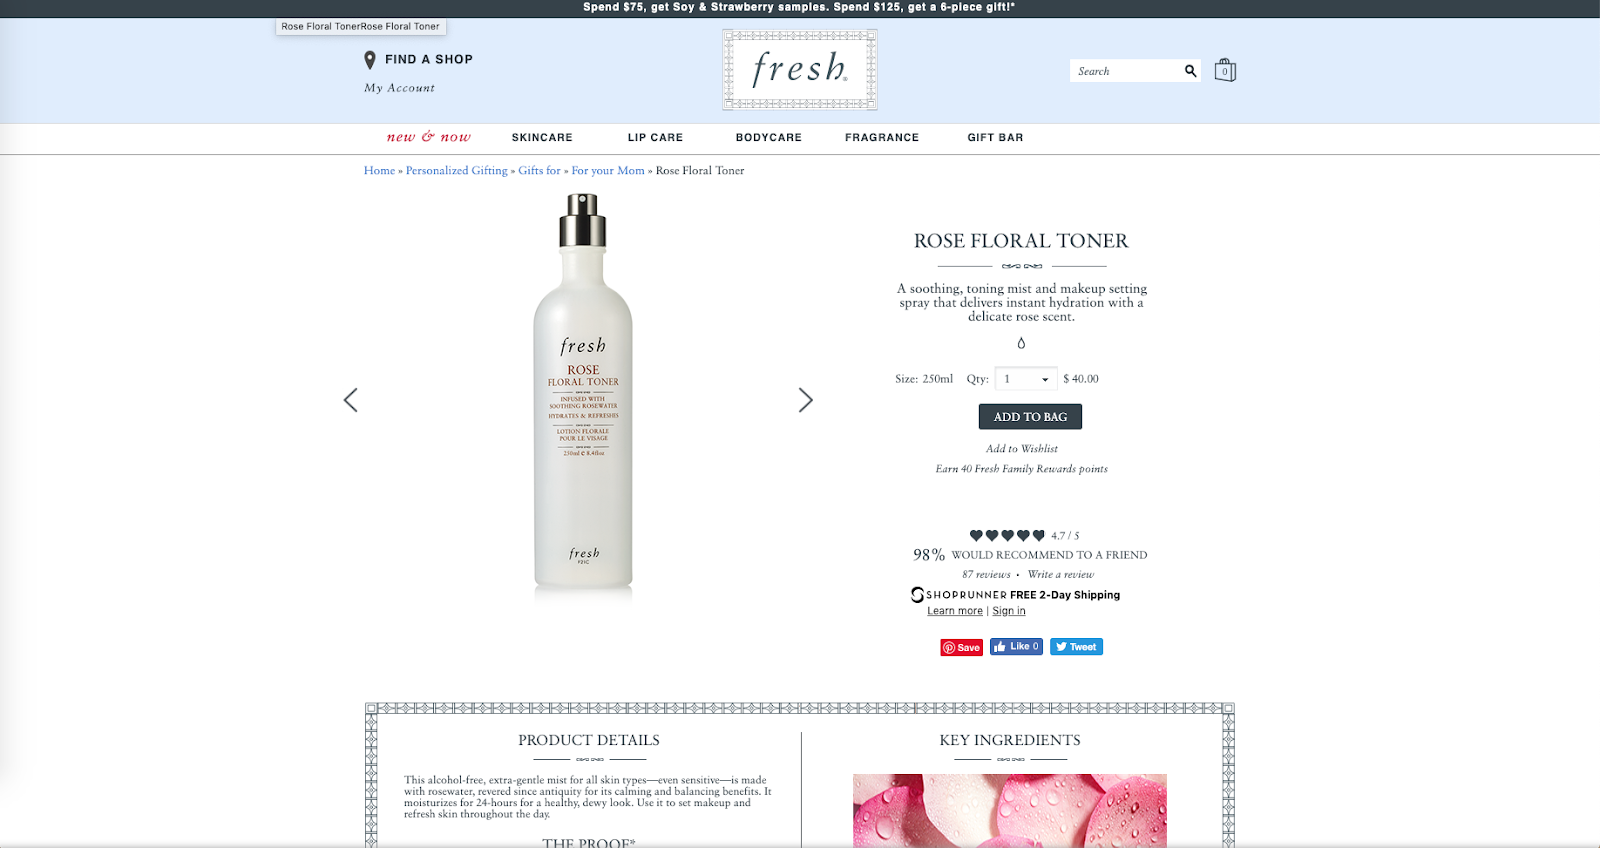 Fresh's product page doesn't use color effectively to draw the eye to a CTA